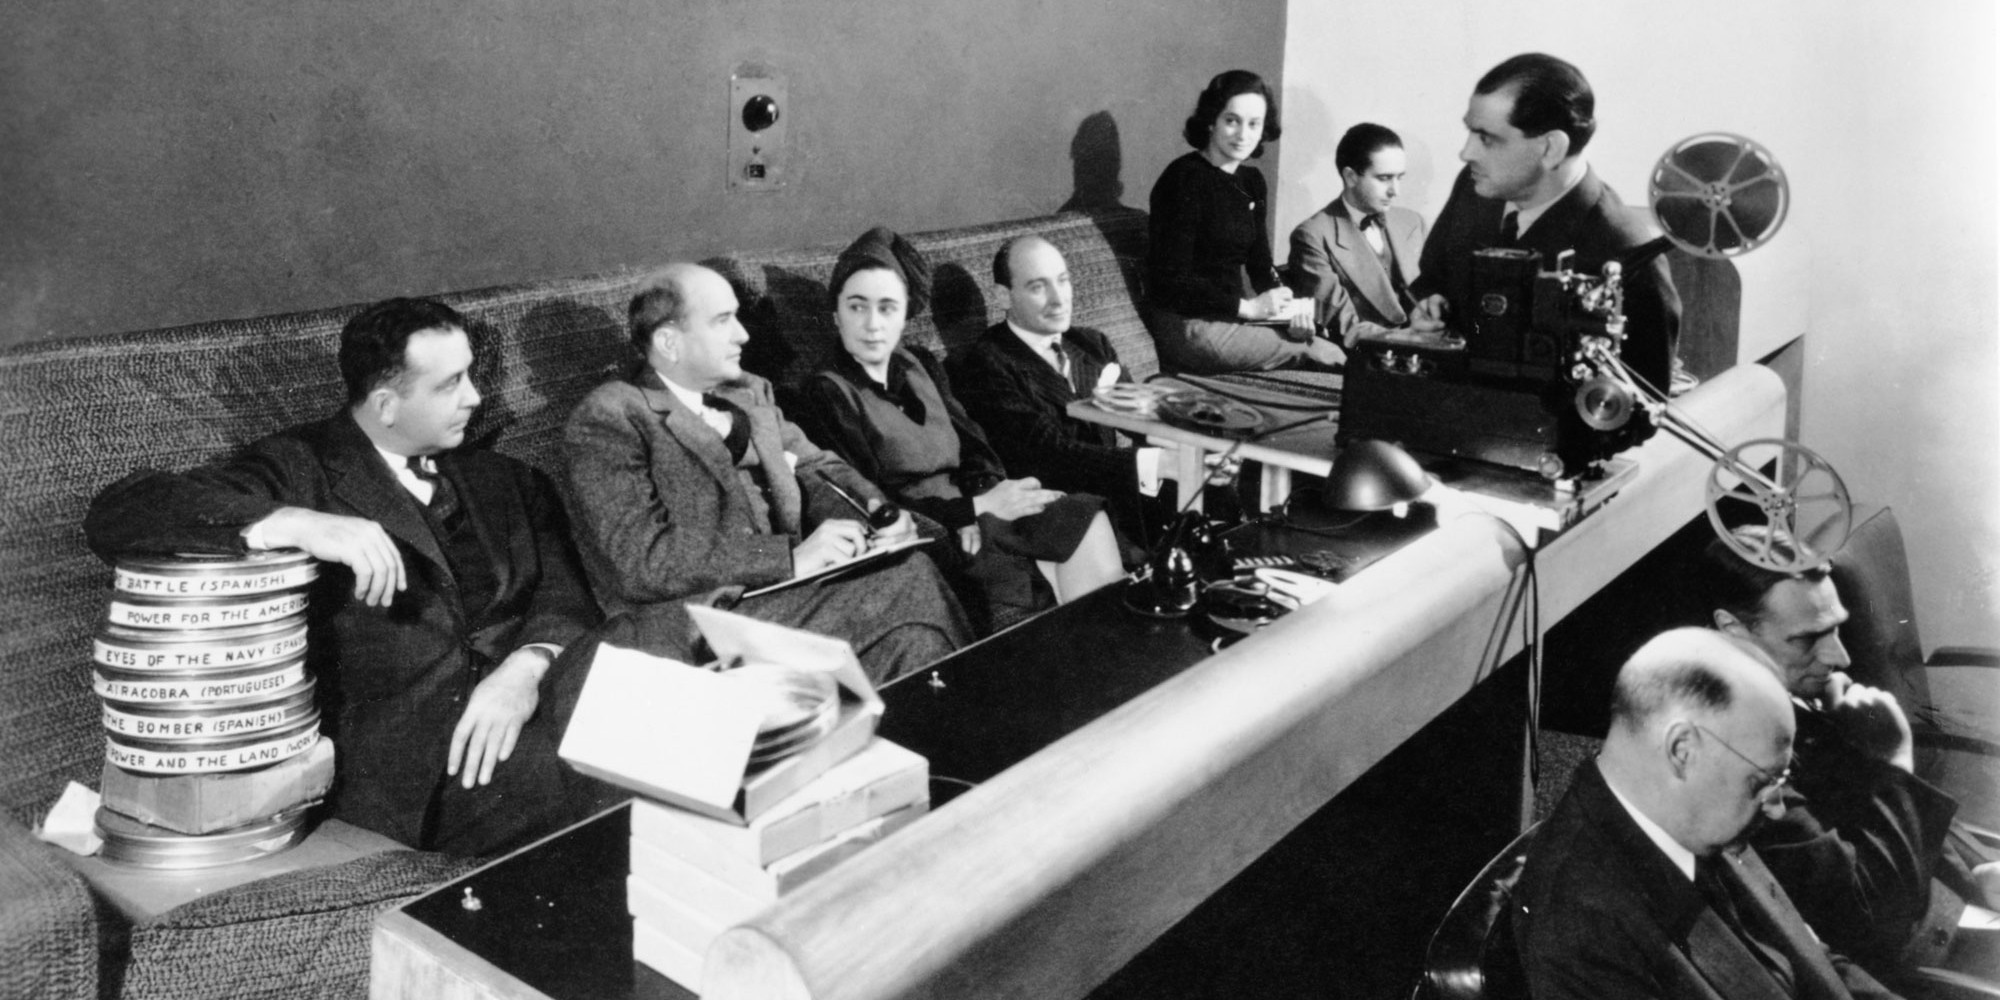 Meeting in MoMA’s projection room, 1942. From left: Ed Kerns, Kenneth Macgowan, Iris Barry, Gustavo Pittaluga, Mercedes Megwinoff, Eduardo Ugarte, Luis Buñuel, Norbet Lust, and Arthur Kross